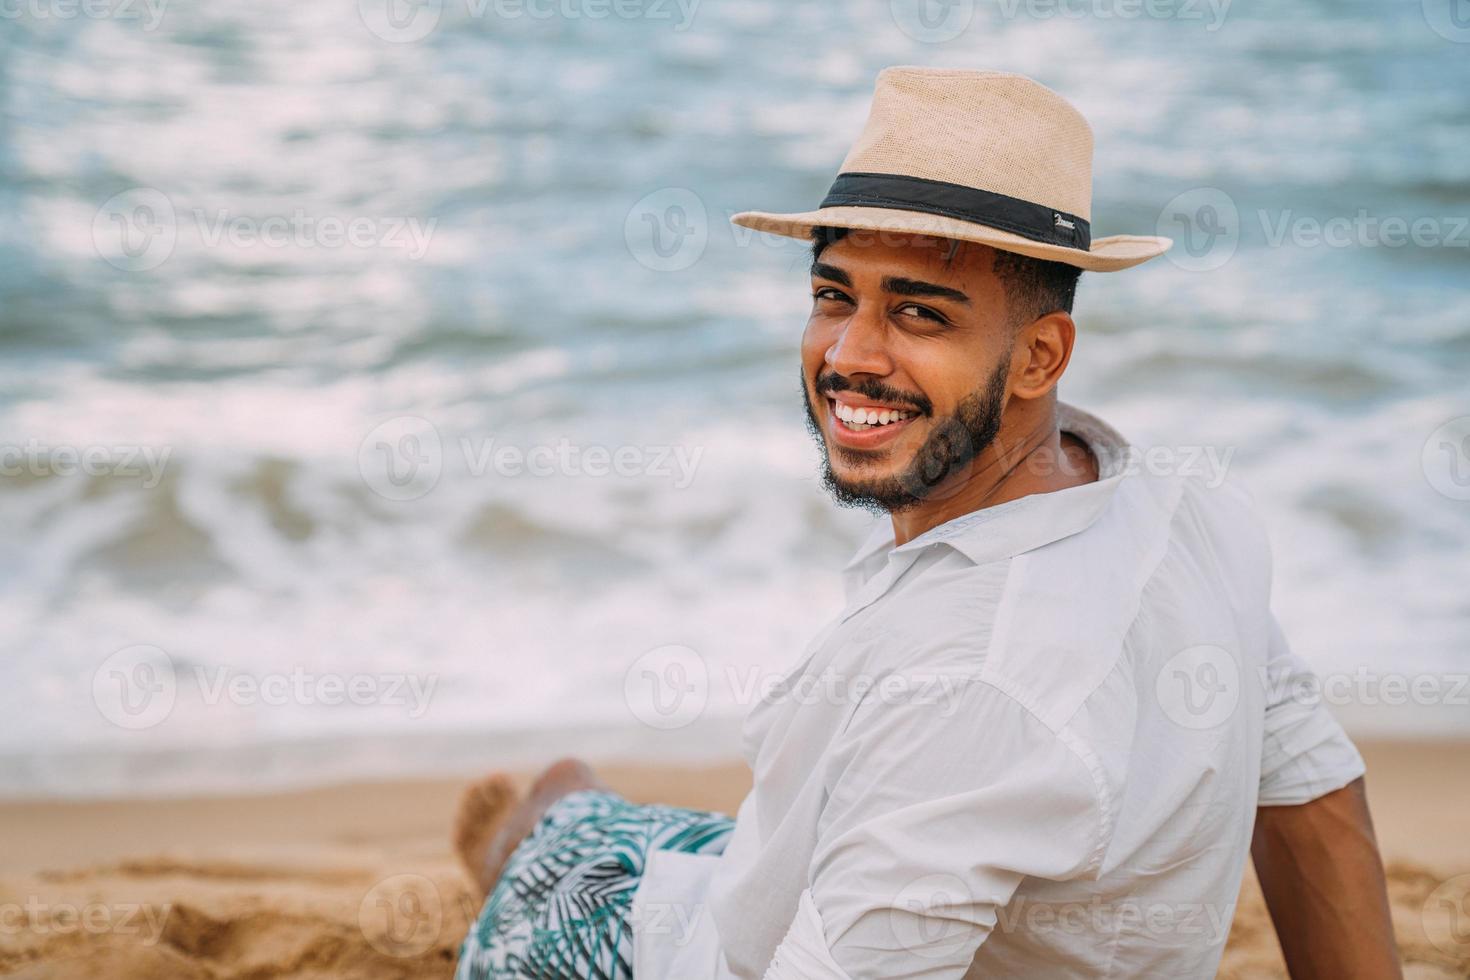 Silhouette of a young man on the beach. latin american man sitting on the beach sand, wearing a hat, looking at the camera. a beautiful summer day photo